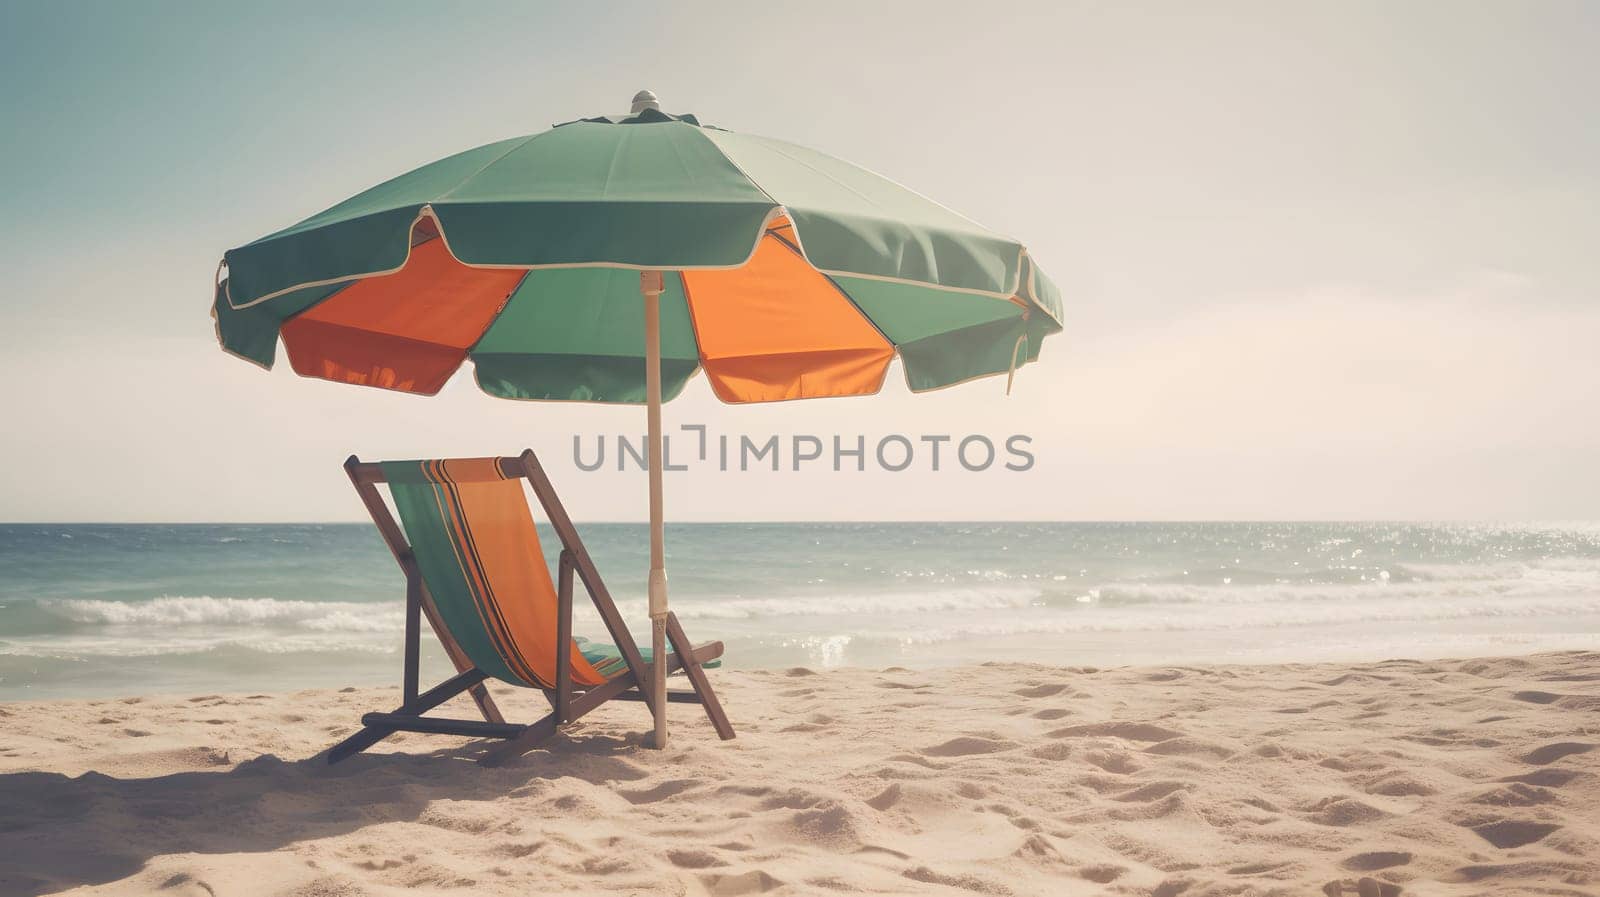 Beach umbrella with chair on the sand beach - summer vacation theme header. Neural network generated in May 2023. Not based on any actual person, scene or pattern.